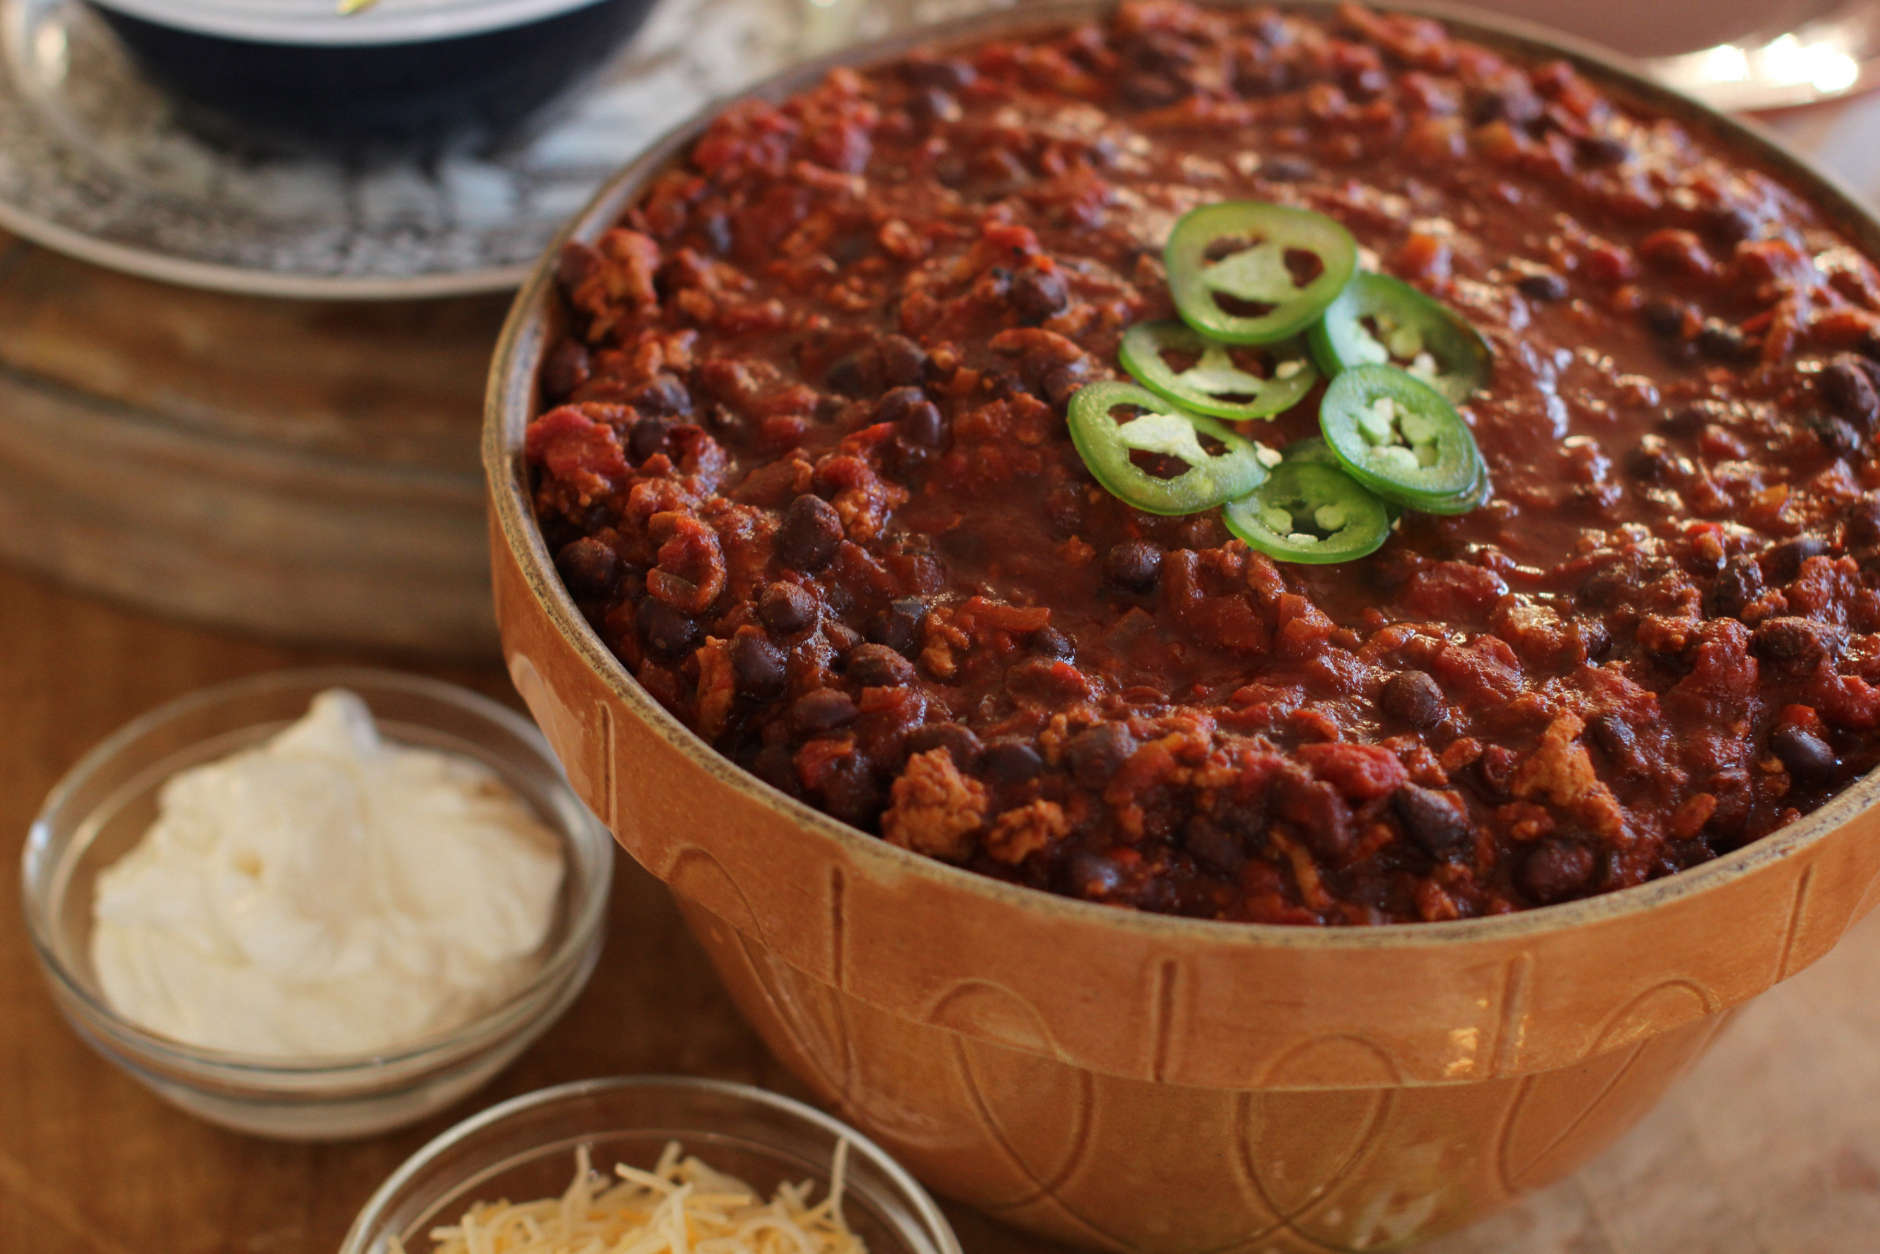 This Nov. 16, 2015 photo shows game day turkey chili in Concord, NH. Everyone has a favorite chili recipe, and this is the time of year to break out yours, invite some friends over and yell at some football players on TV. (AP Photo/Matthew Mead)